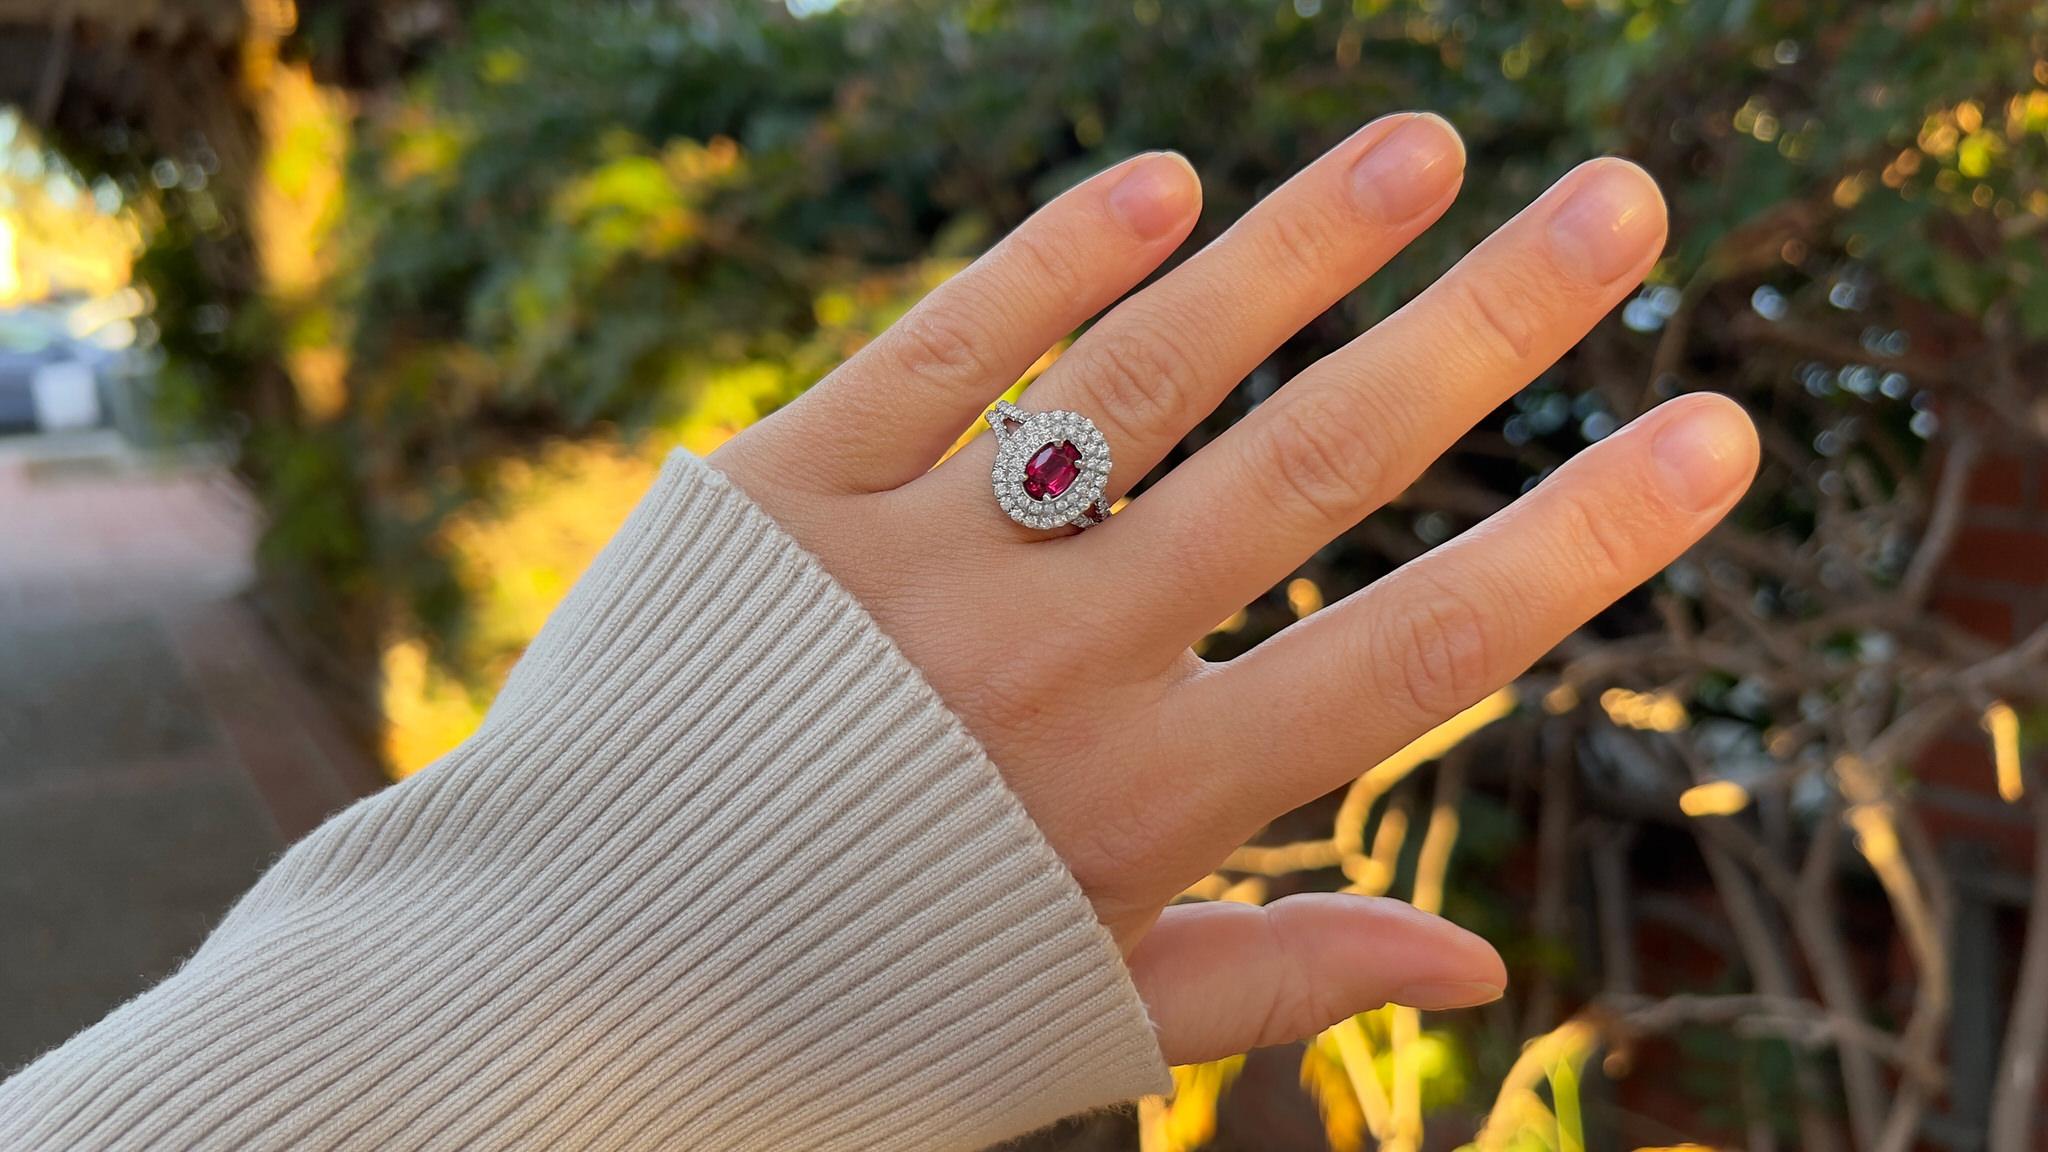 Burma Ruby = 0.87 Carat
(Cut: Oval, Color: Red, Origin: Natural)
Diamond = 0.70 Carats
(Cut: Round, Color: F, Clarity: VS)
Metal = 18K White Gold
Ring Size = 6.5